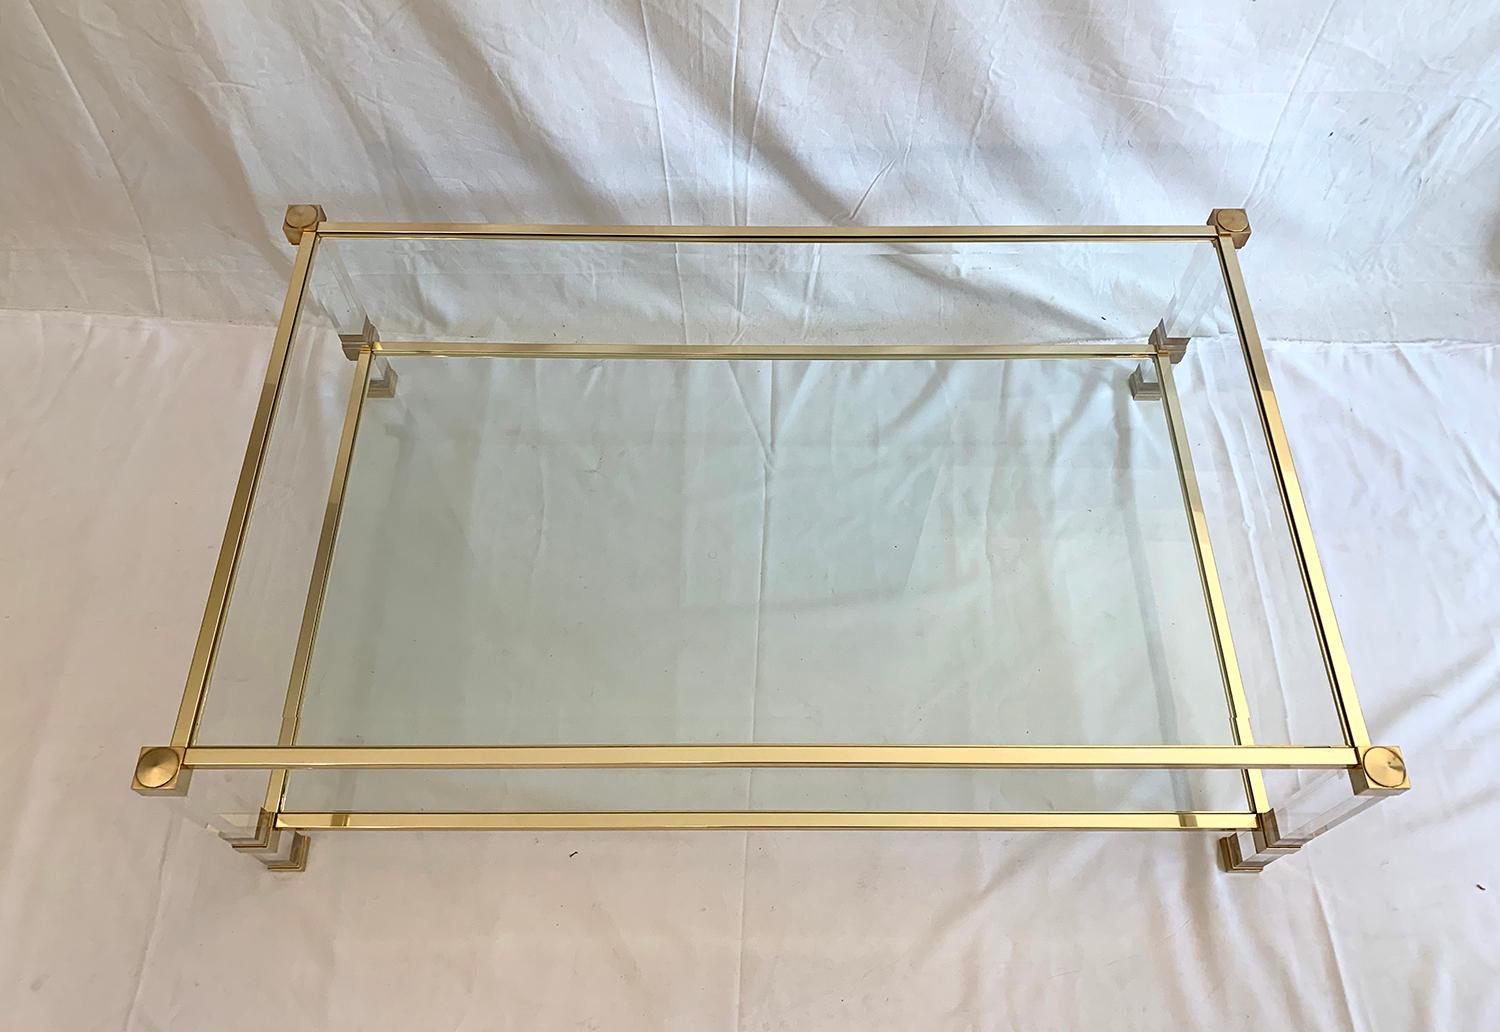 Superb coffee table with two levels designed by Pierre Vandel, 1970s. The brass and plexiglass plated metal structure displays two transparent glass trays, one of which is beveled. The table is in very good condition.

Superbe table basse à deux